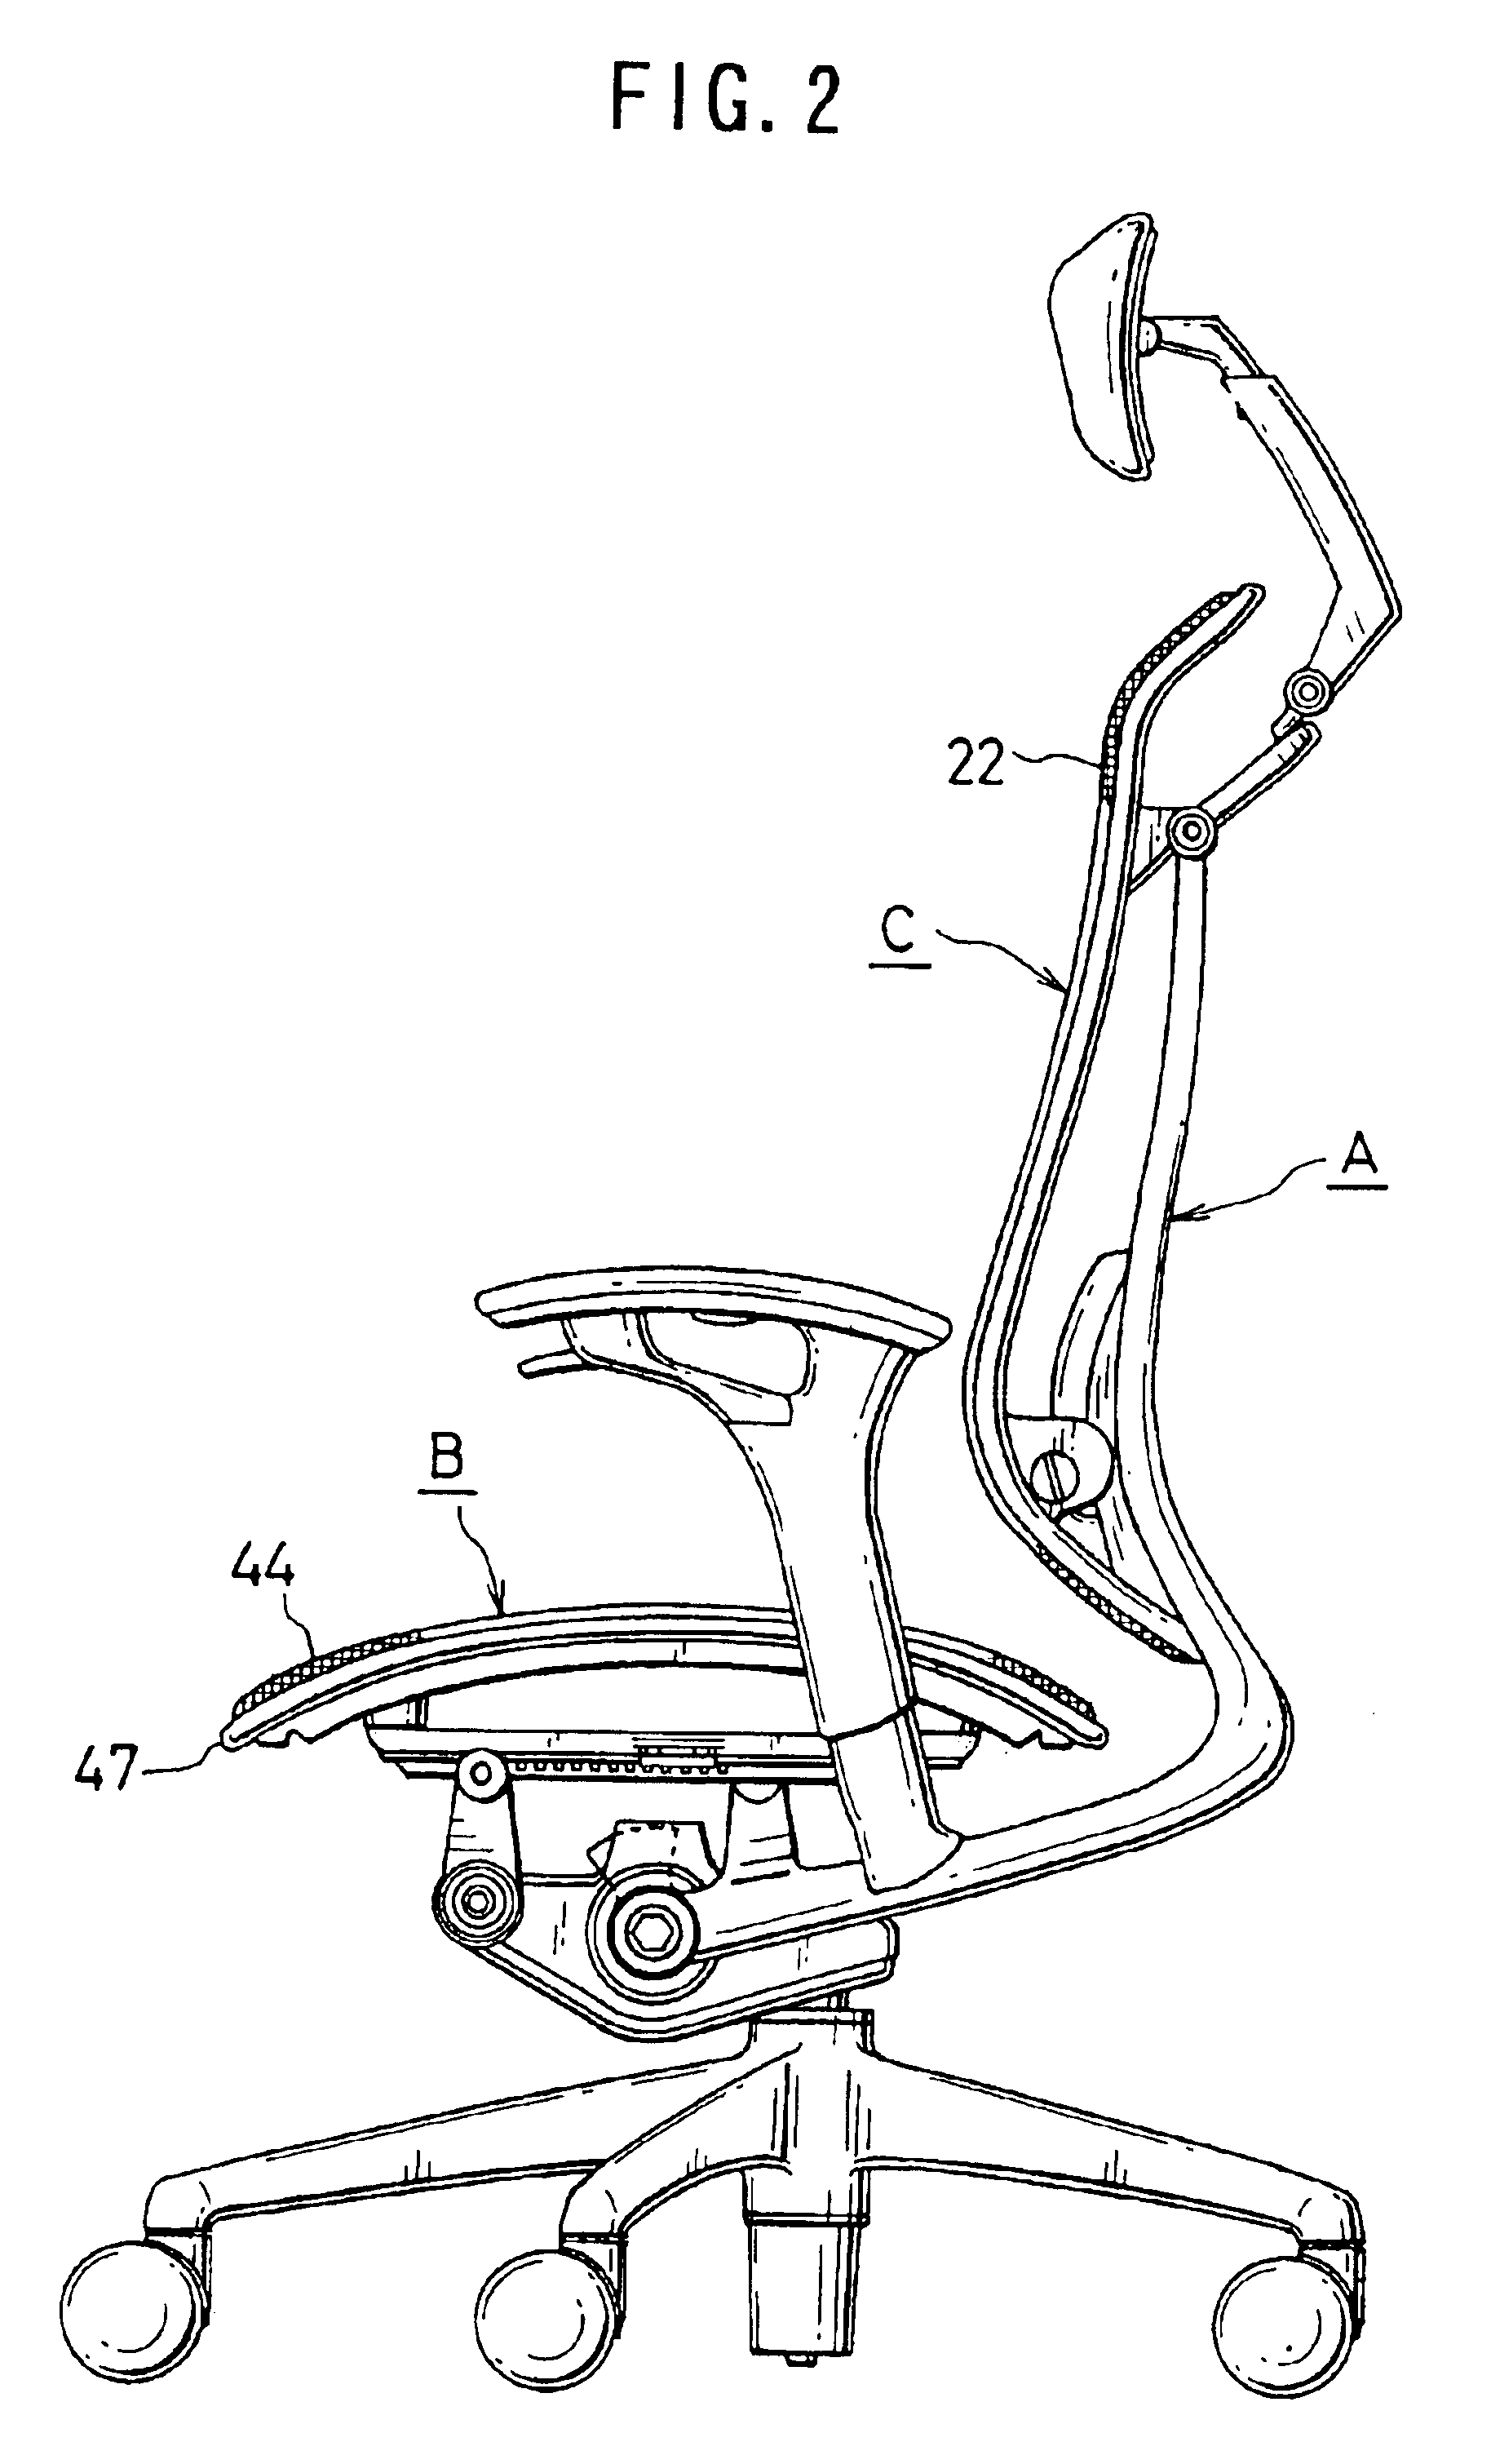 Structure for mounting a net member to a frame for a seat or backrest of a chair